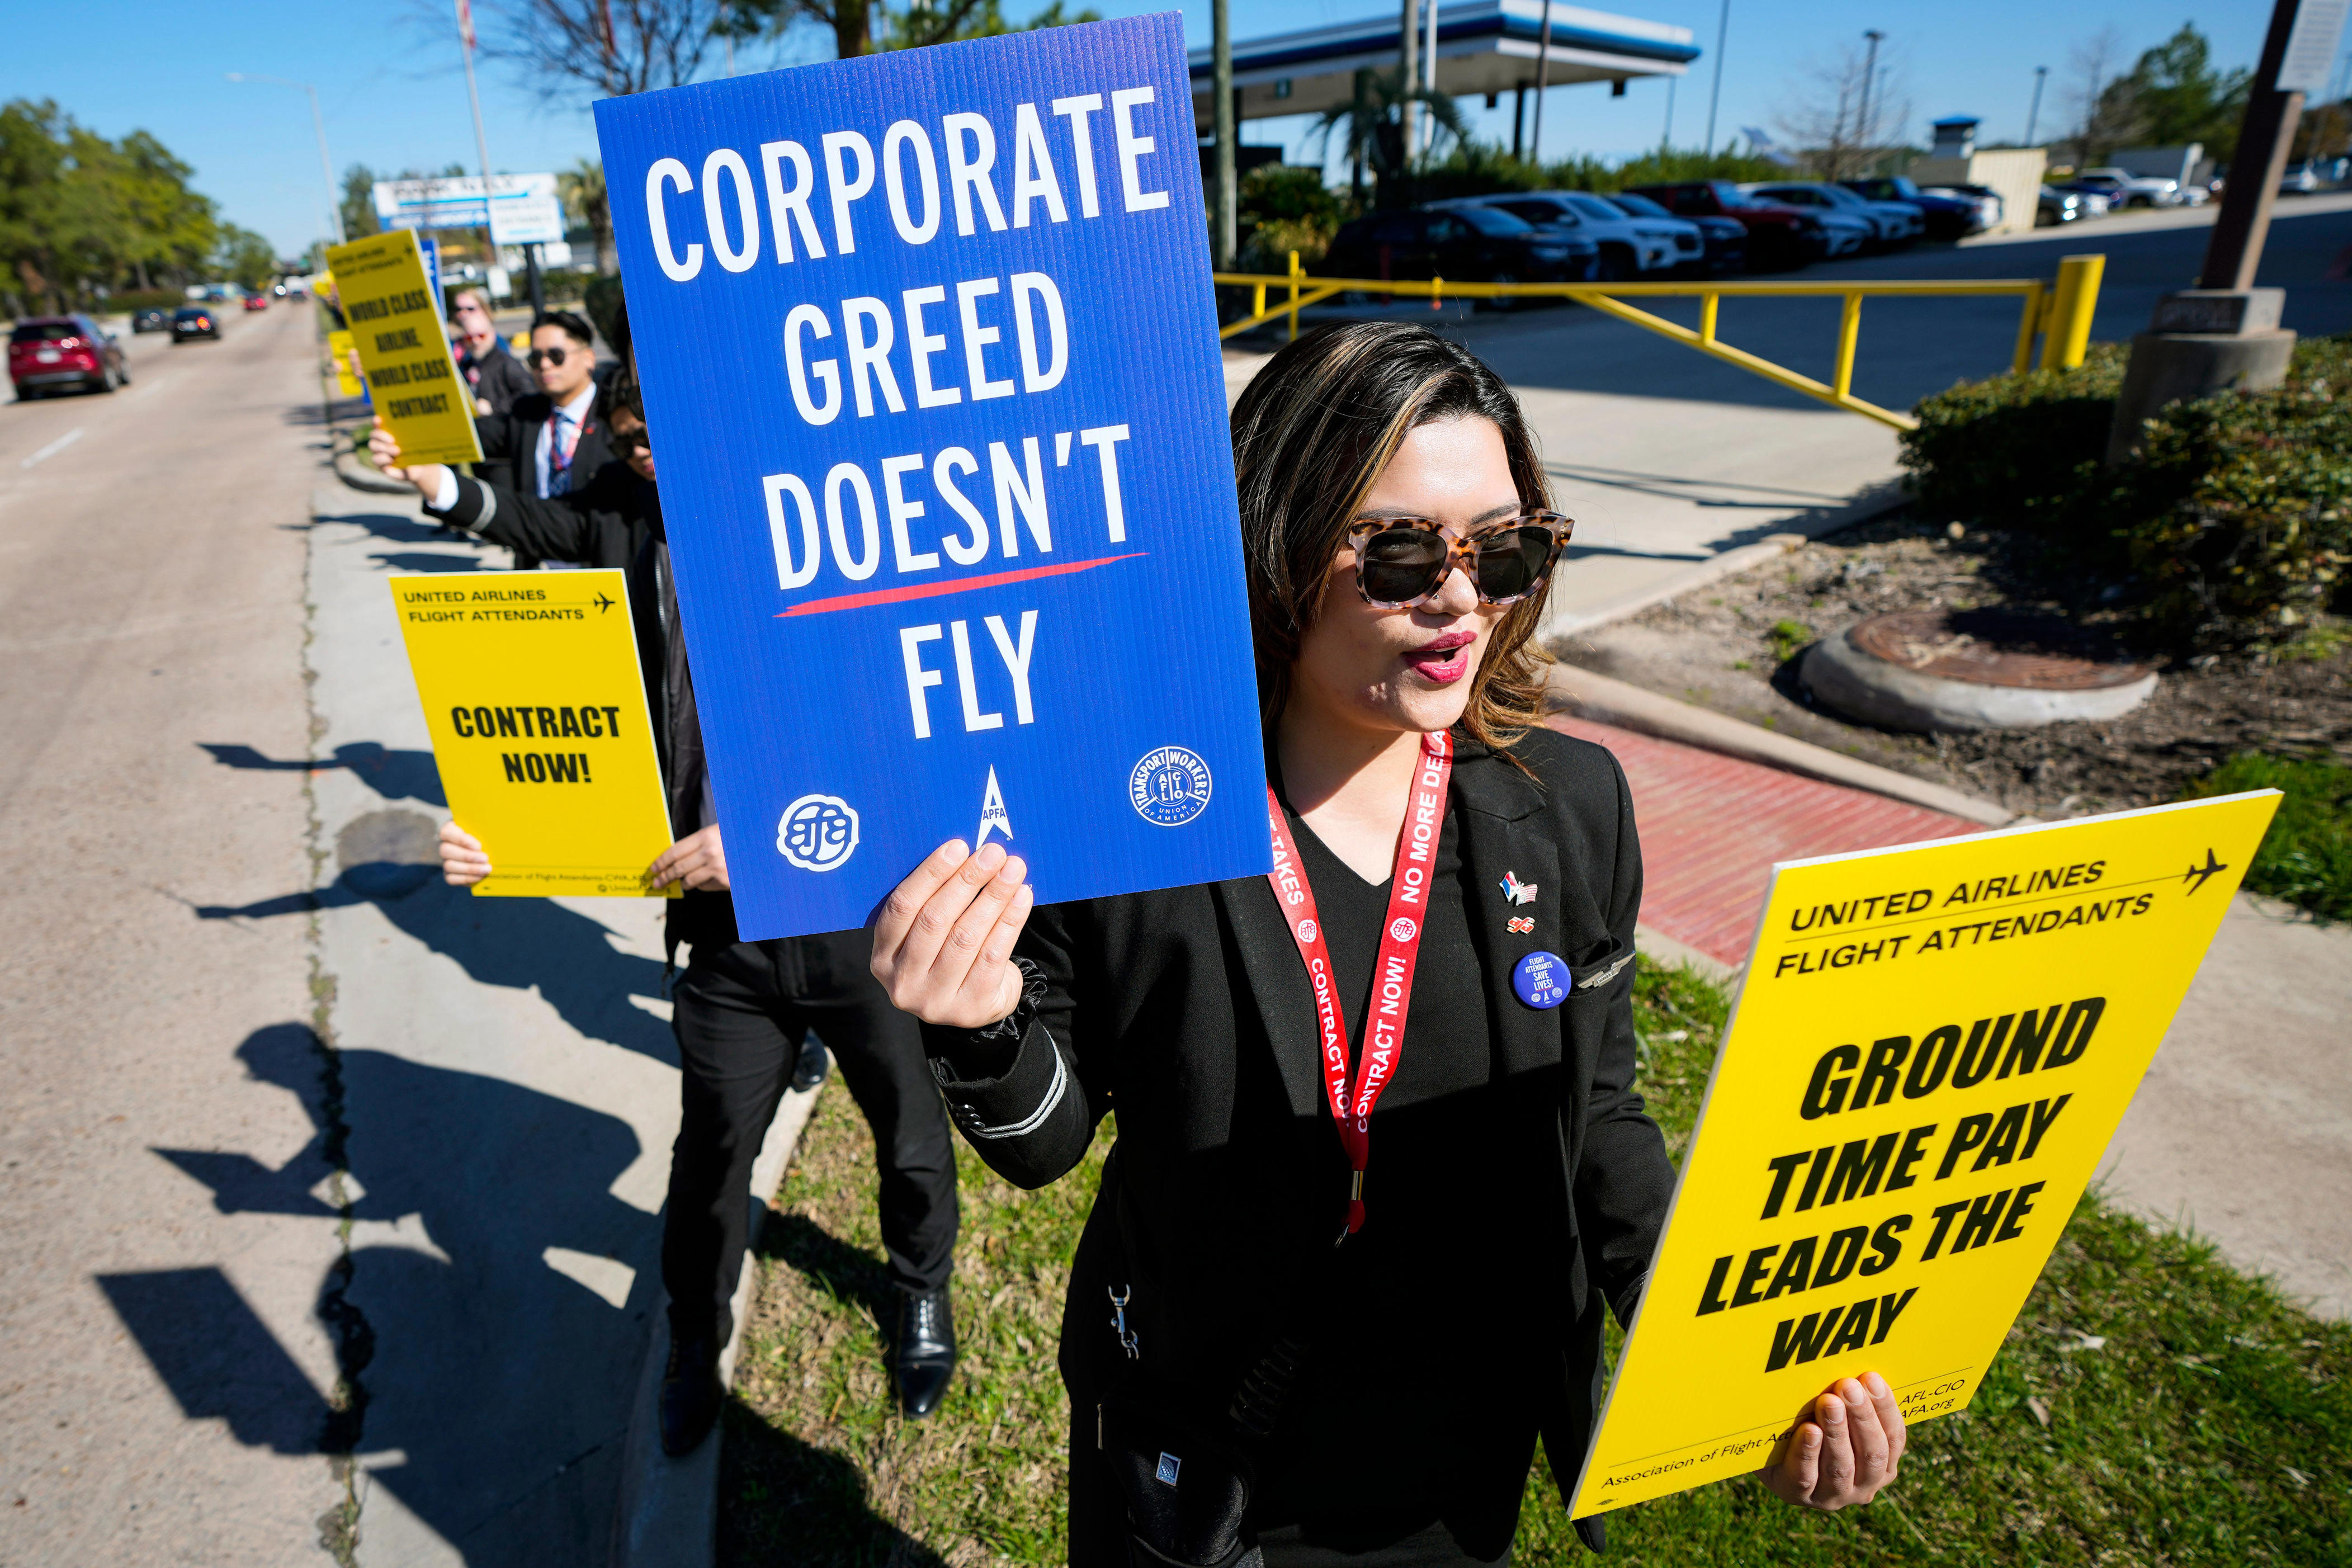 microsoft, united airlines flight attendants picketed at over a dozen airports worldwide after the ceo received a 90% pay increase